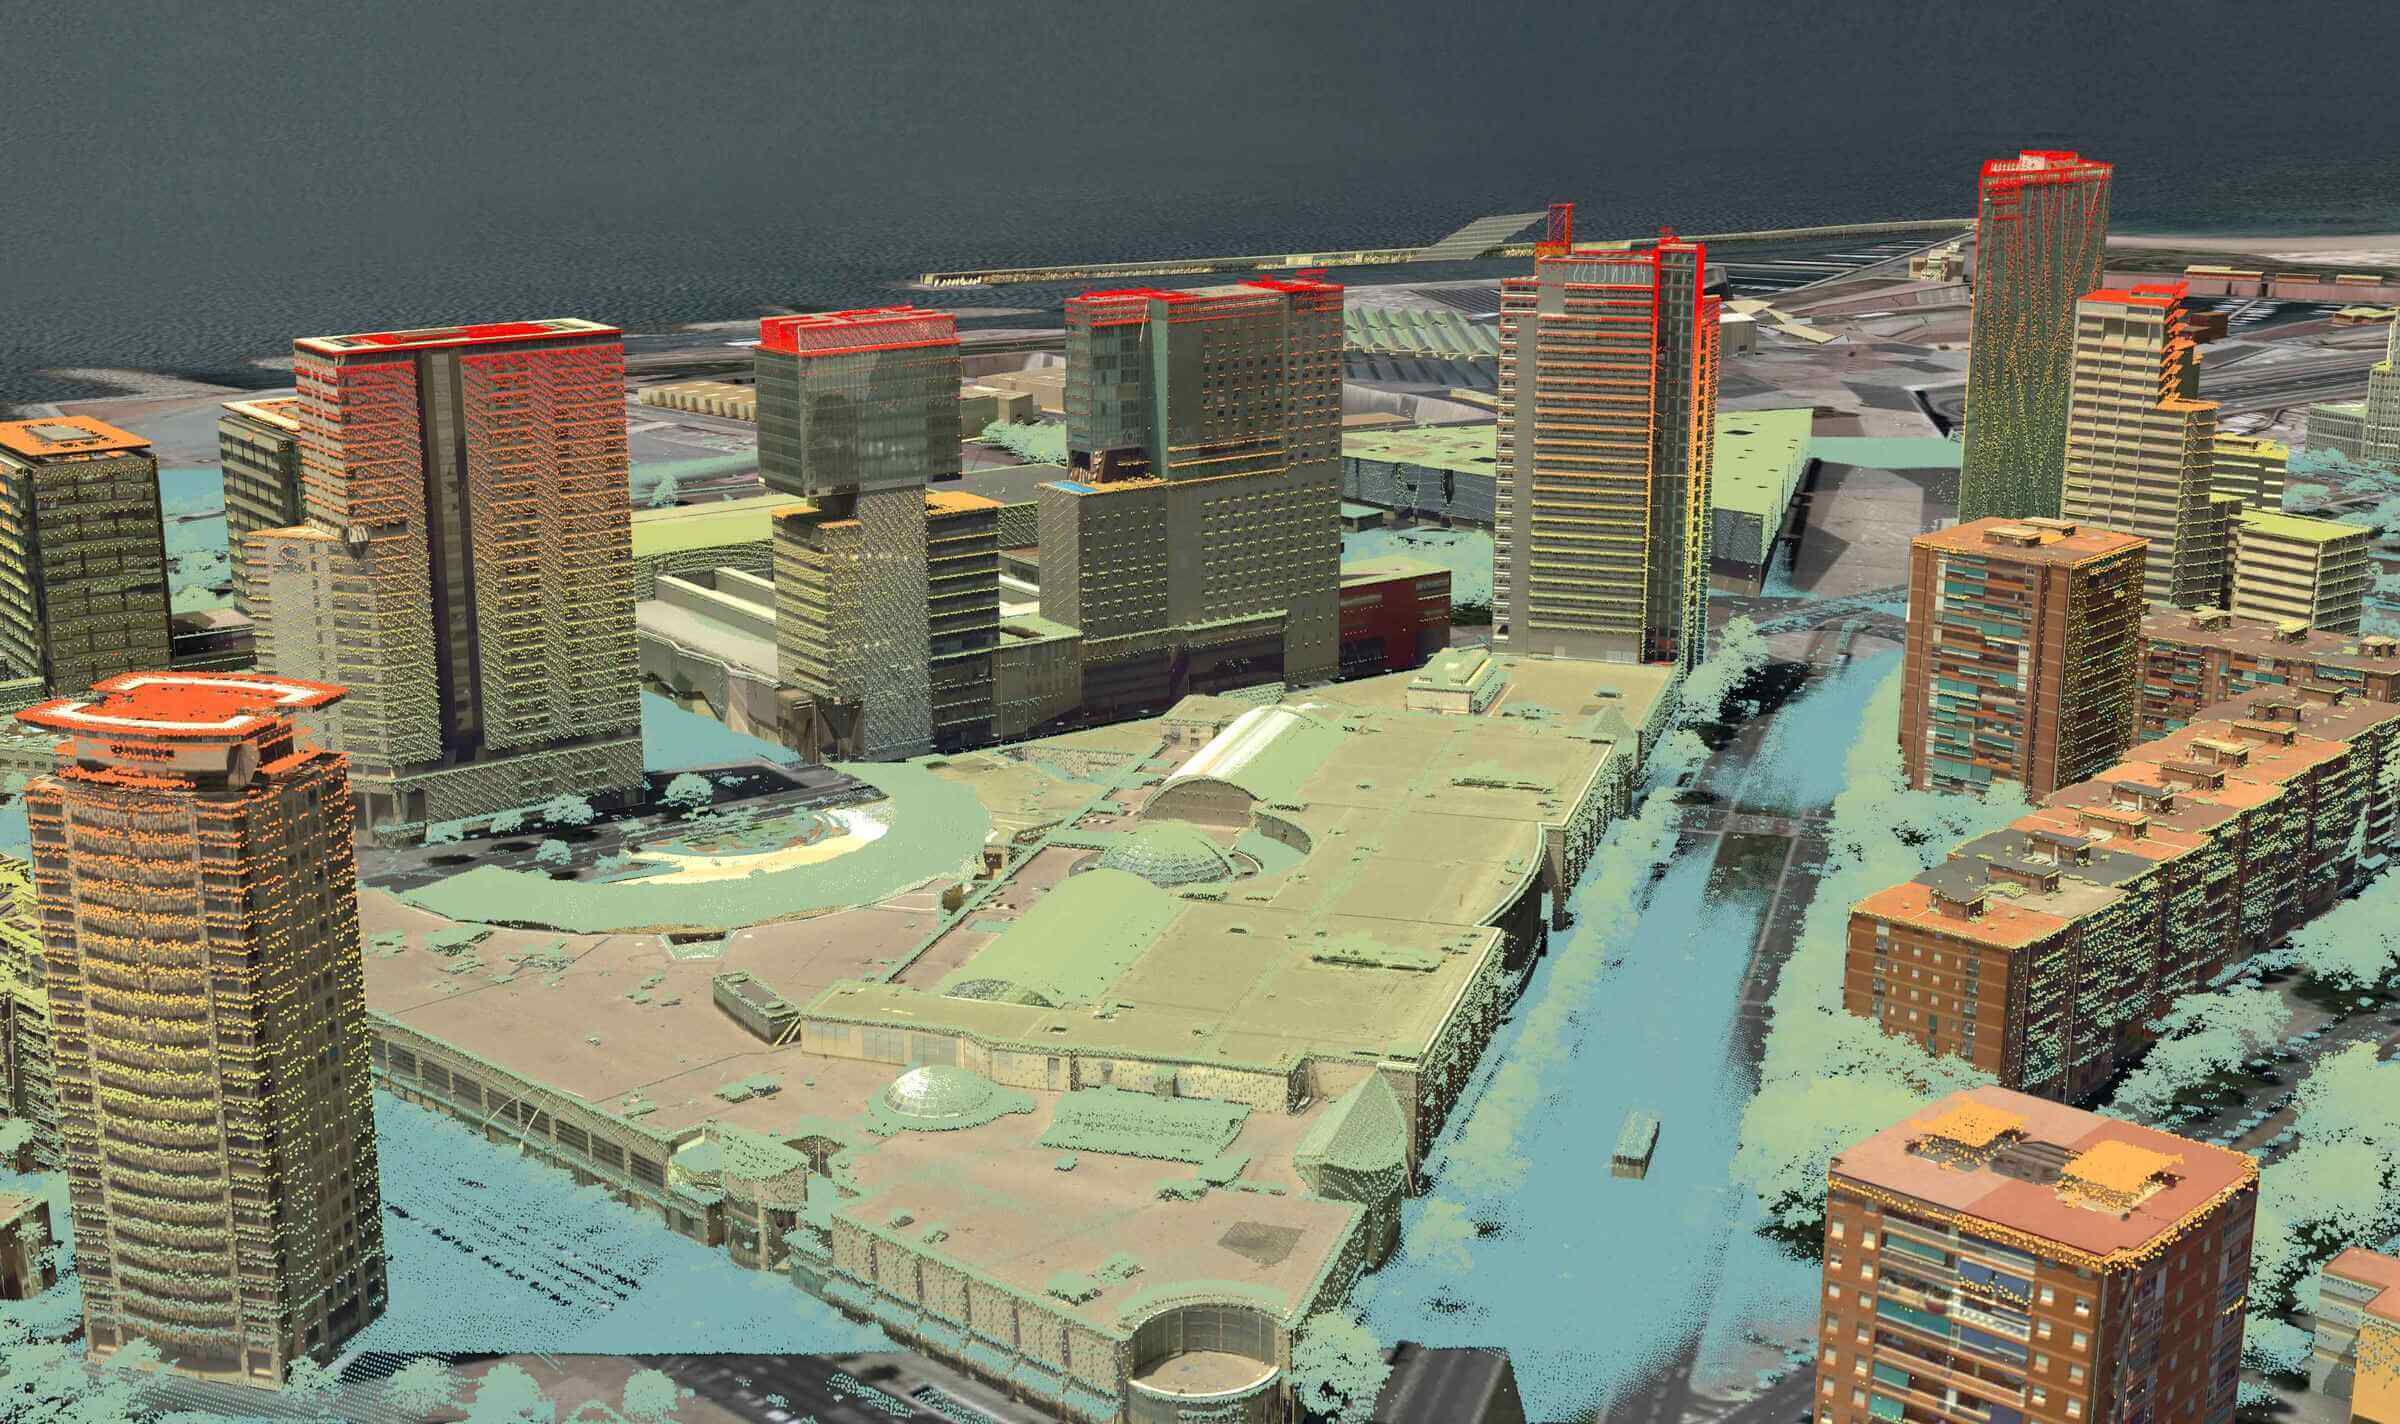 3D city model created with Leica RealCity LiDAR and imagery 4 11zon